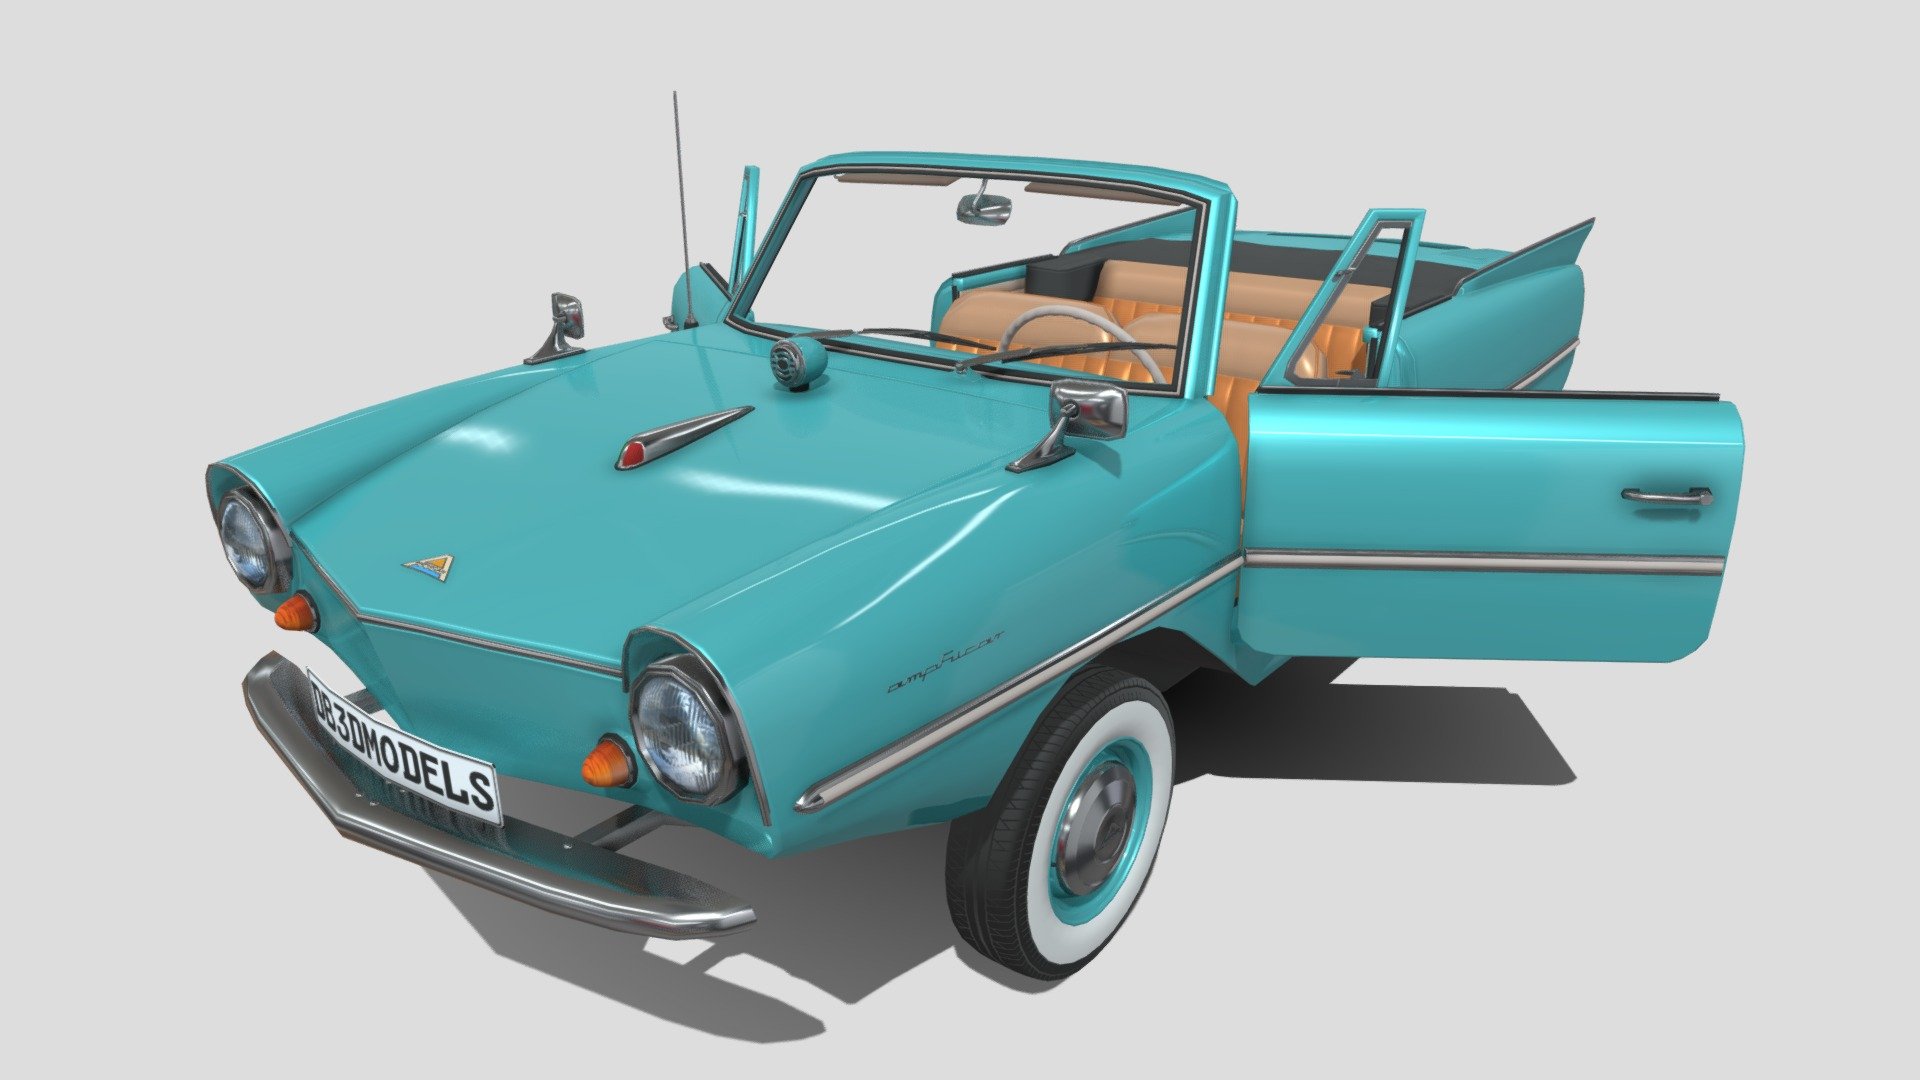 Highly detailed Amphicar 770 with a detailed interior 3d model rendered with Cycles in Blender, as per seen on attached images. 
The 3d model is scaled to original size in Blender.

File formats:
-.blend, rendered with cycles, as seen in the images;
-.blend, open, rendered with cycles, as seen in the images;
-.obj, with materials applied;
-.obj, open, with materials applied;
-.dae, with materials applied;
-.dae, open, with materials applied;
-.fbx, with materials applied;
-.fbx, open, with materials applied;
-.stl;
-.stl, open;

3D Software:
The 3D model was originally created in Blender 2.8 and rendered with Cycles.

Materials and textures:
The models have materials applied in all formats, and are ready to import and render.
The models come with two png textures(one for the number plate, which can easily be removed).

General:
The models are built mostly out of quads and are subdivisable.
It comes in separate parts, named correctly for the sake of convenience 3d model